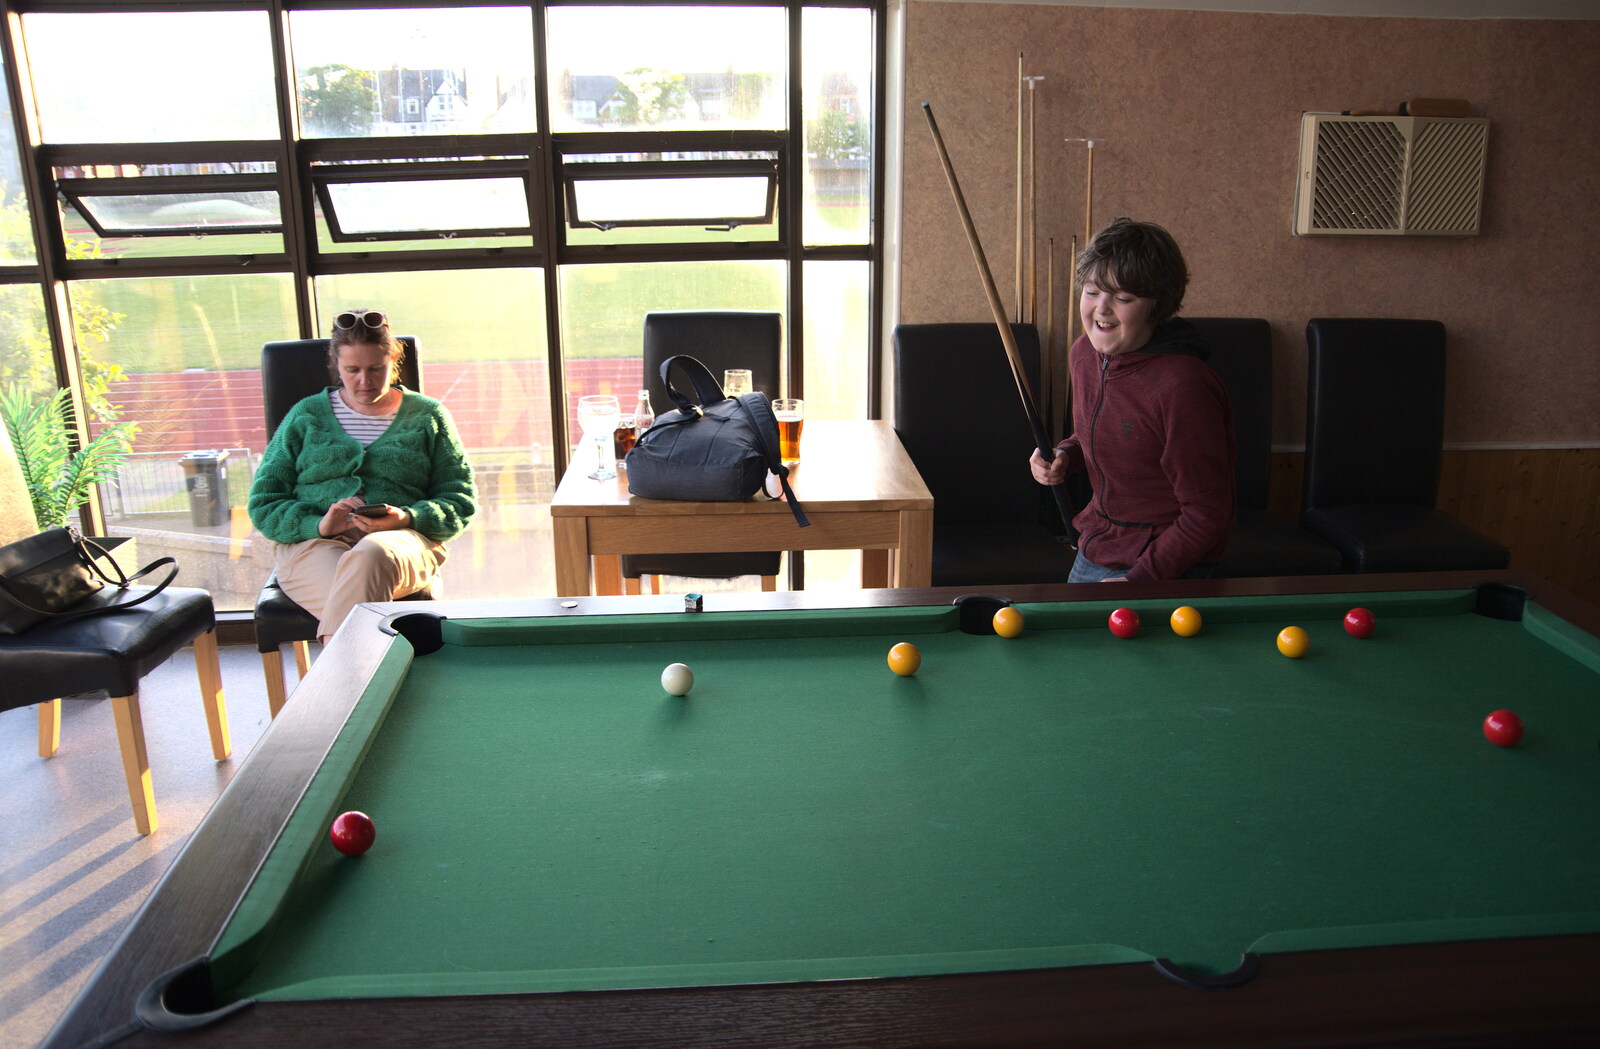 Fred gets a ball down as we play pool from Faded Seaside Glamour: A Weekend in Great Yarmouth, Norfolk - 29th May 2022